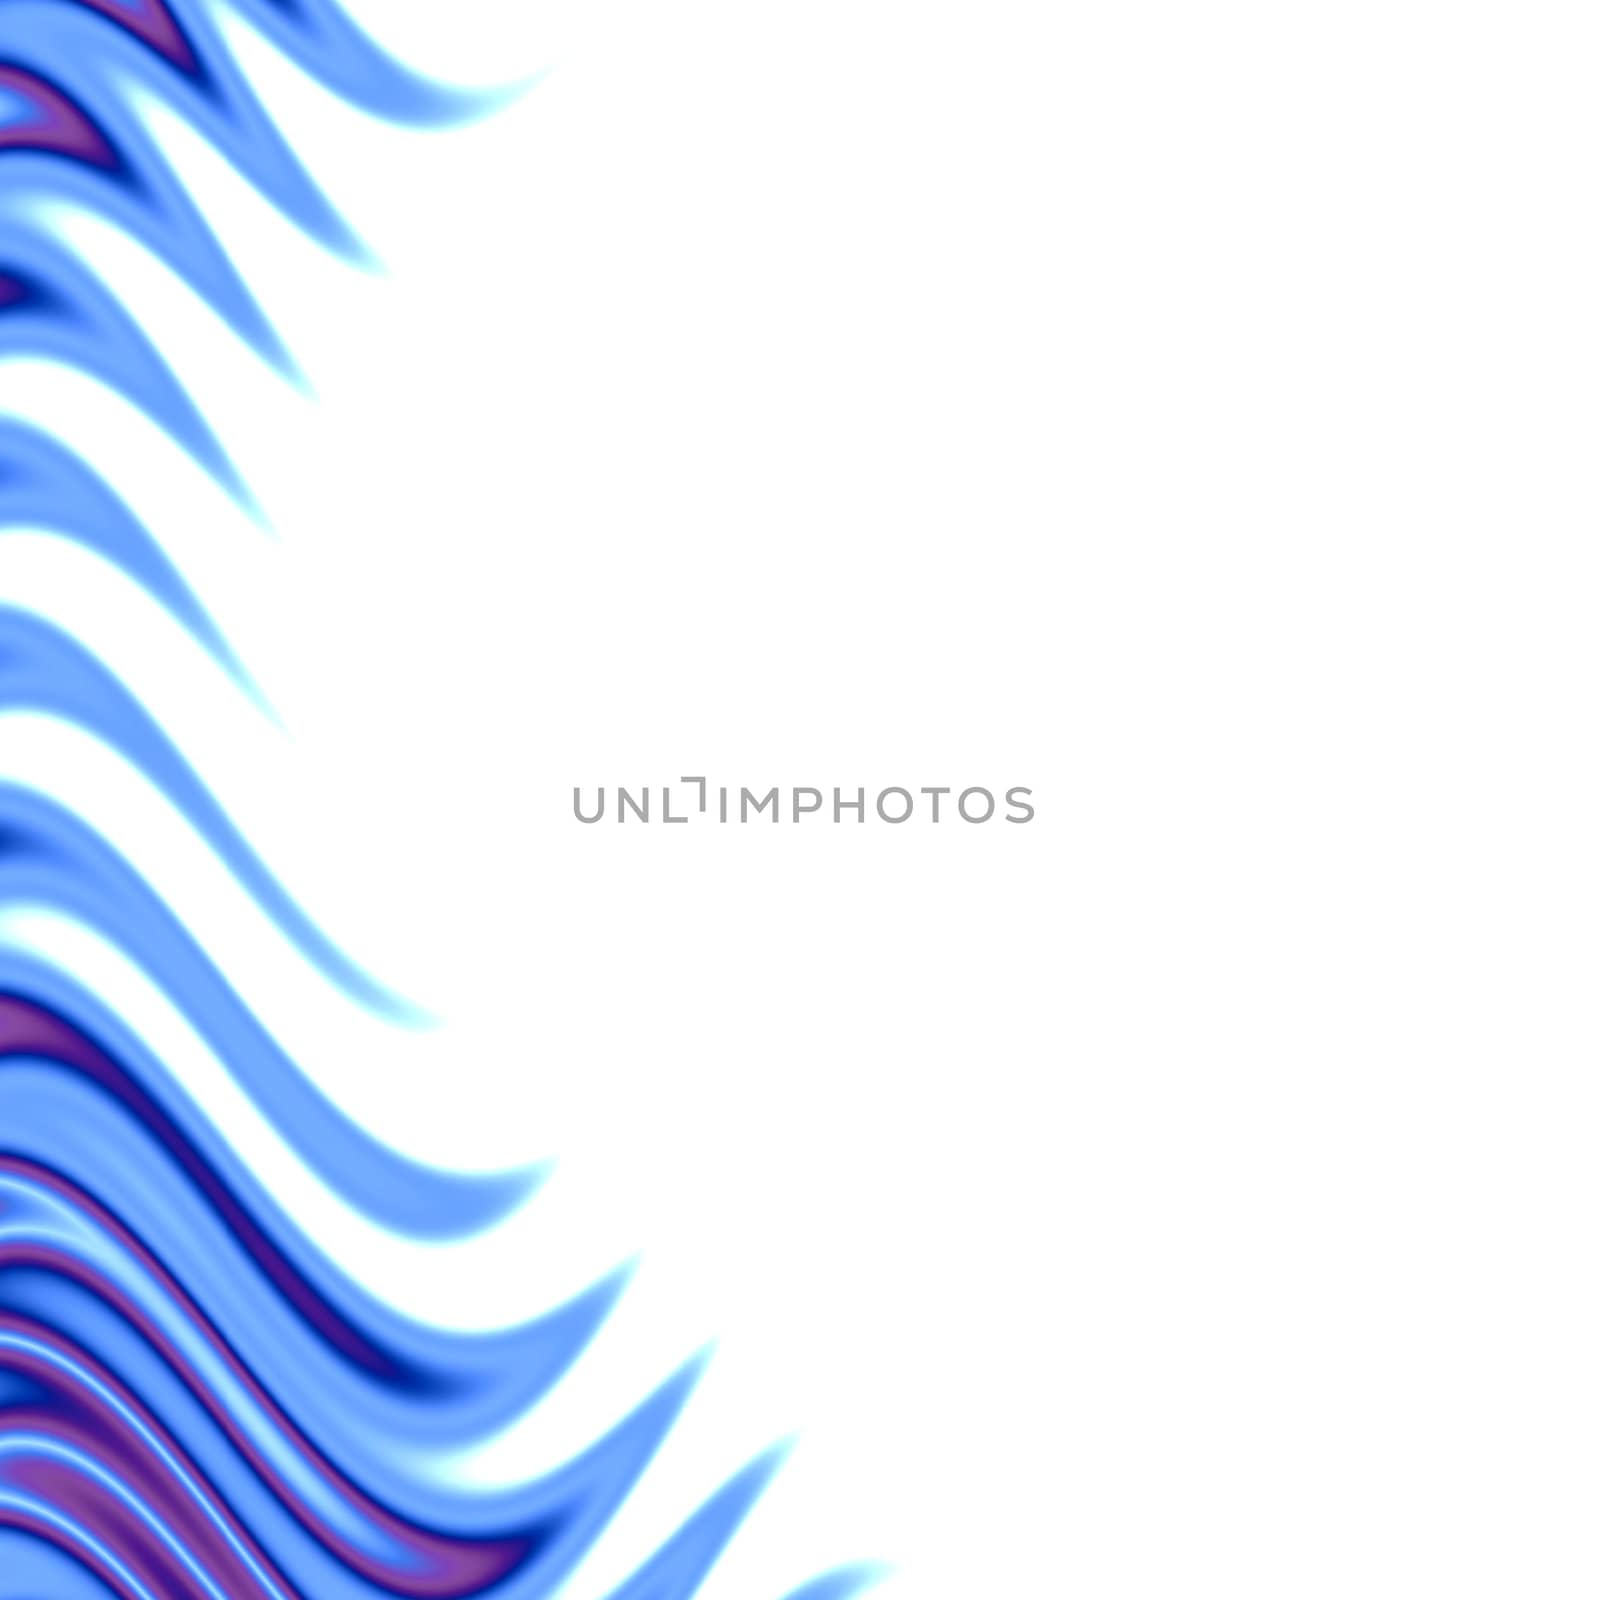 an abstract flames background - blue spikey swirls isolated over white